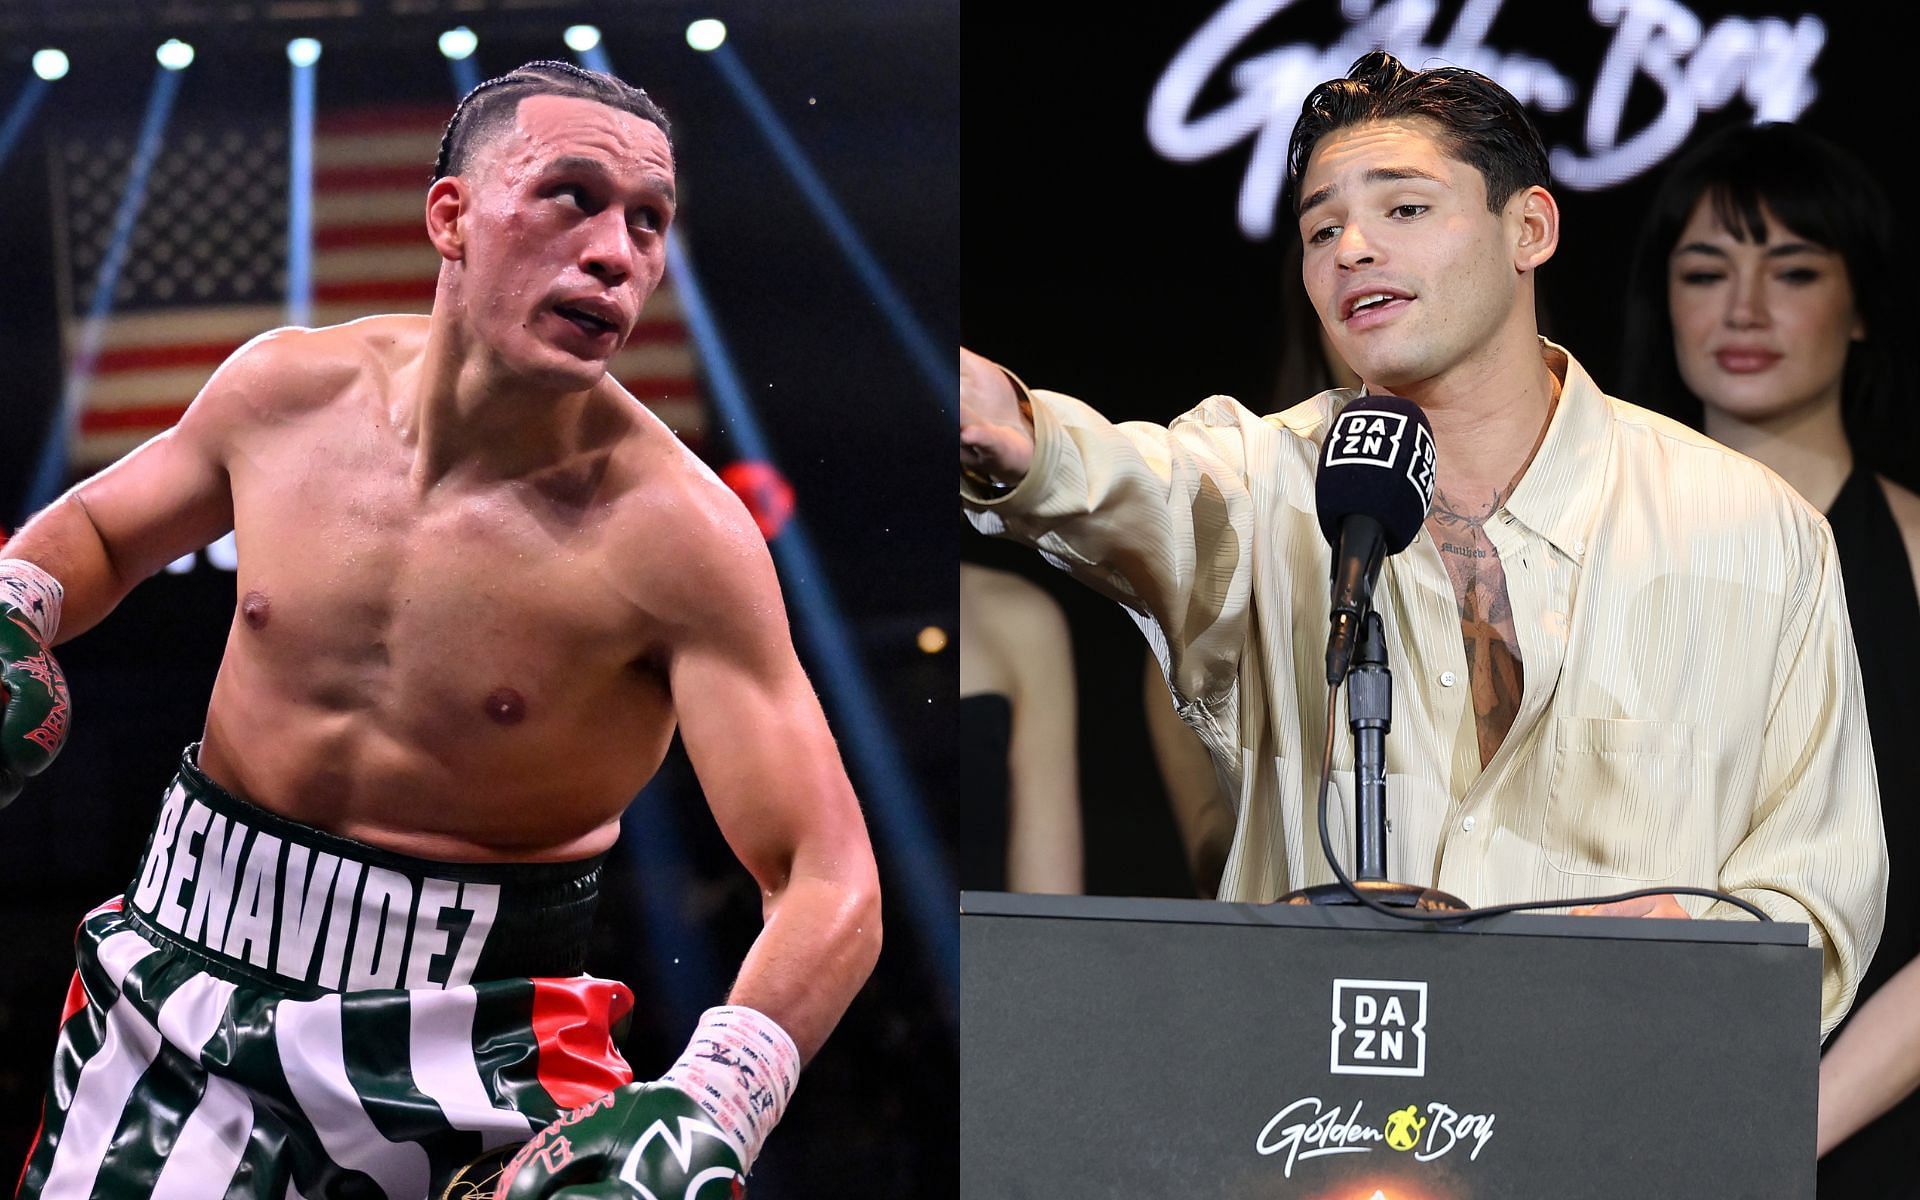 David Benavidez (left) and Ryan Garcia (right) are heralded among the top-tier pugilists in the world [Images courtesy: Getty Images]